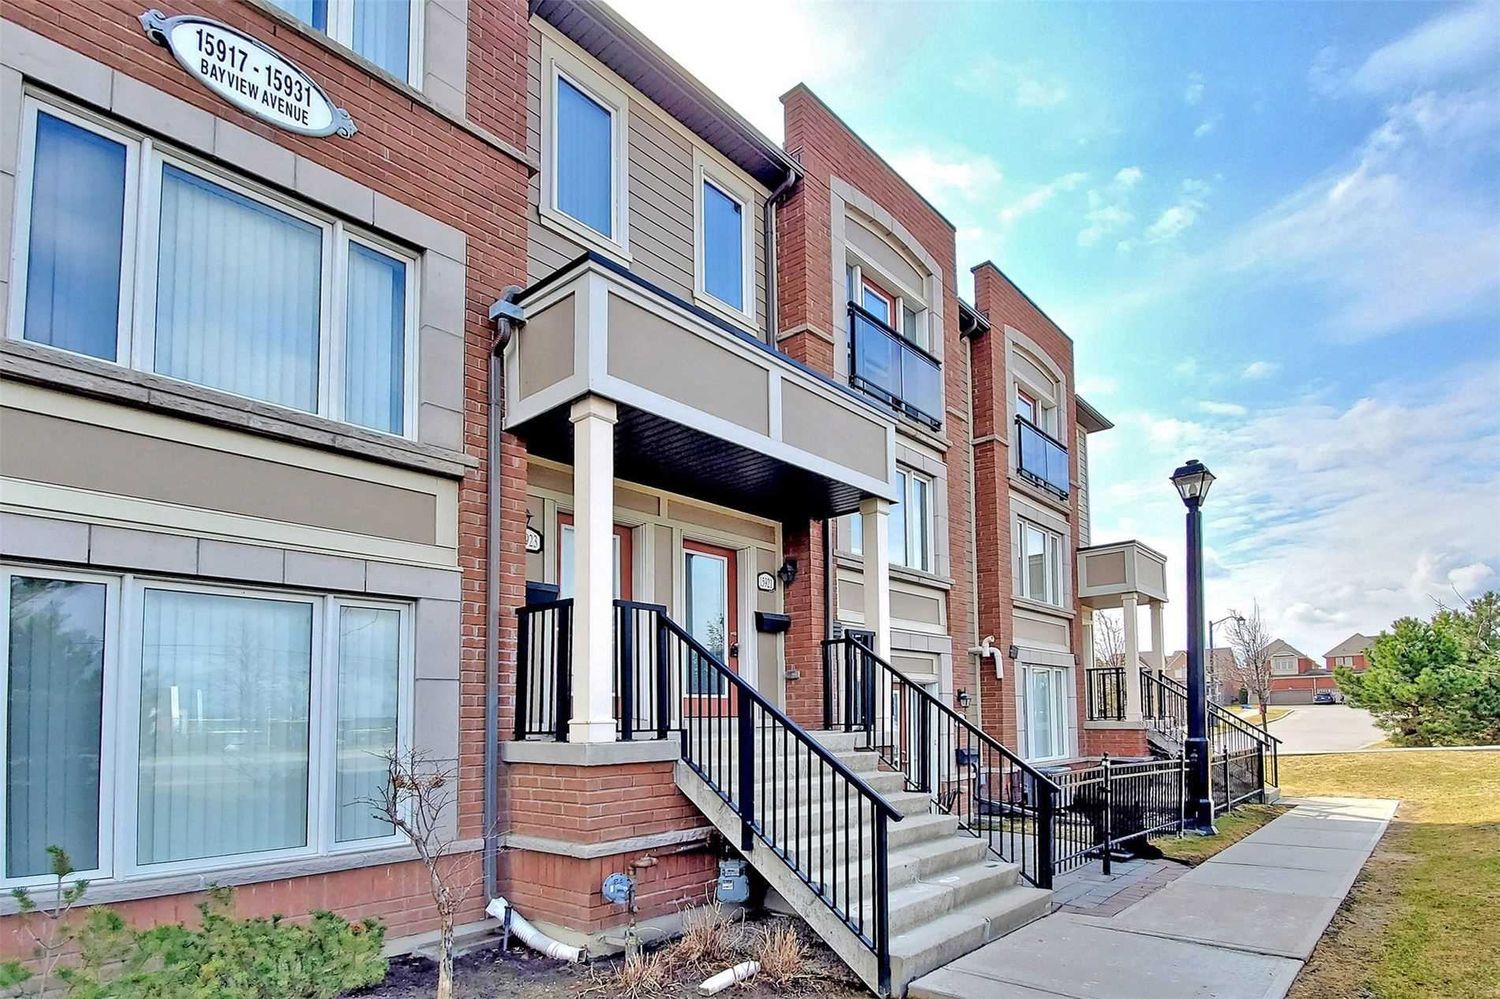 15917-15951 Bayview Avenue. First Home Aurora Townhomes is located in  Aurora, Toronto - image #3 of 3